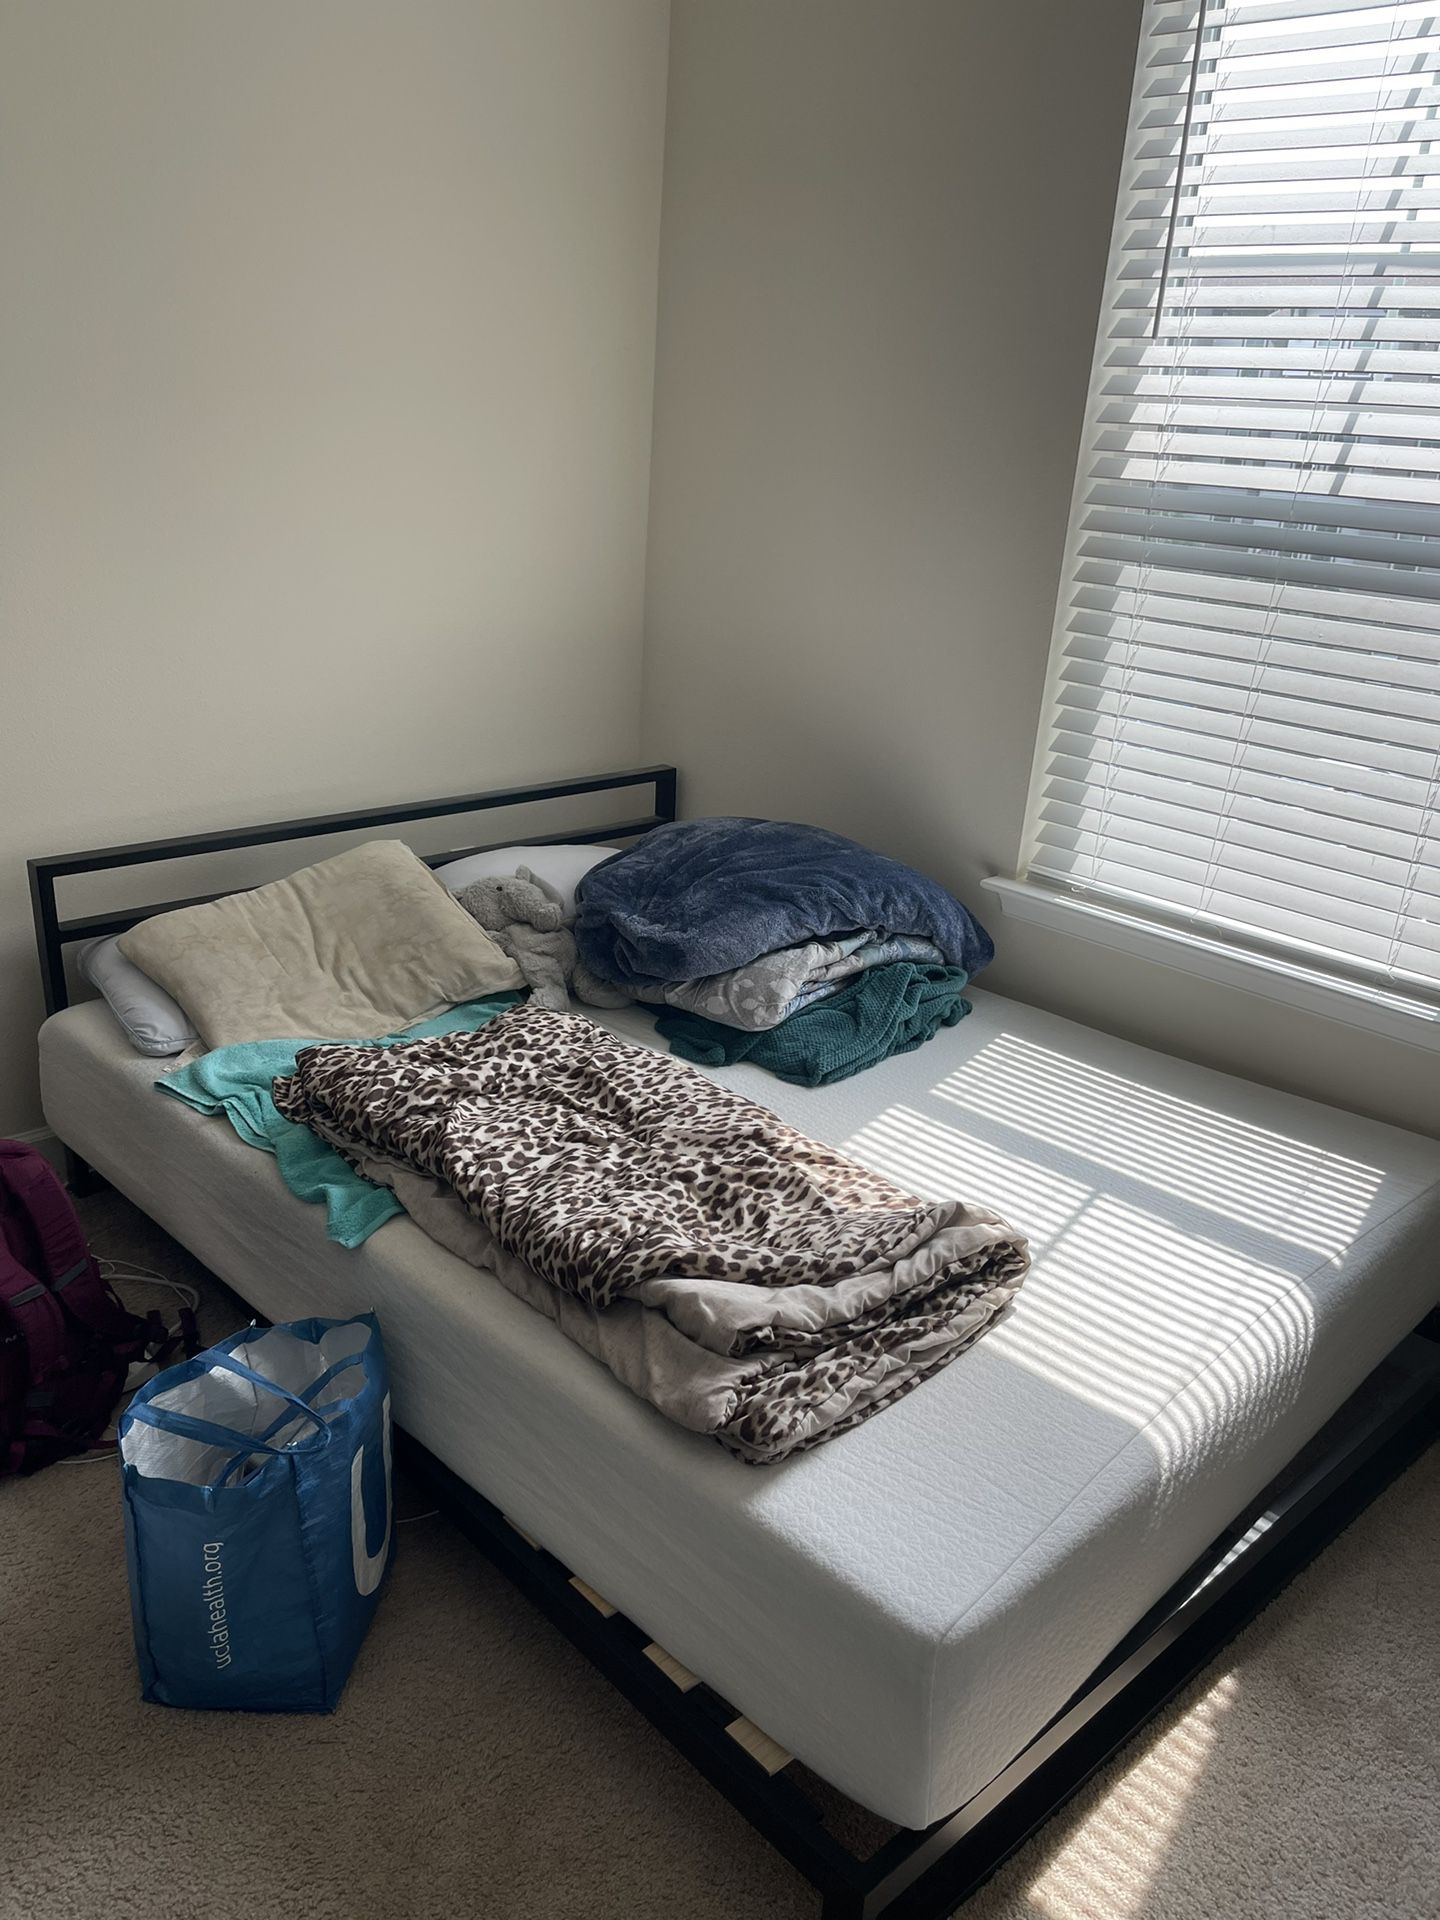 Selling Bed Frame And Mattress